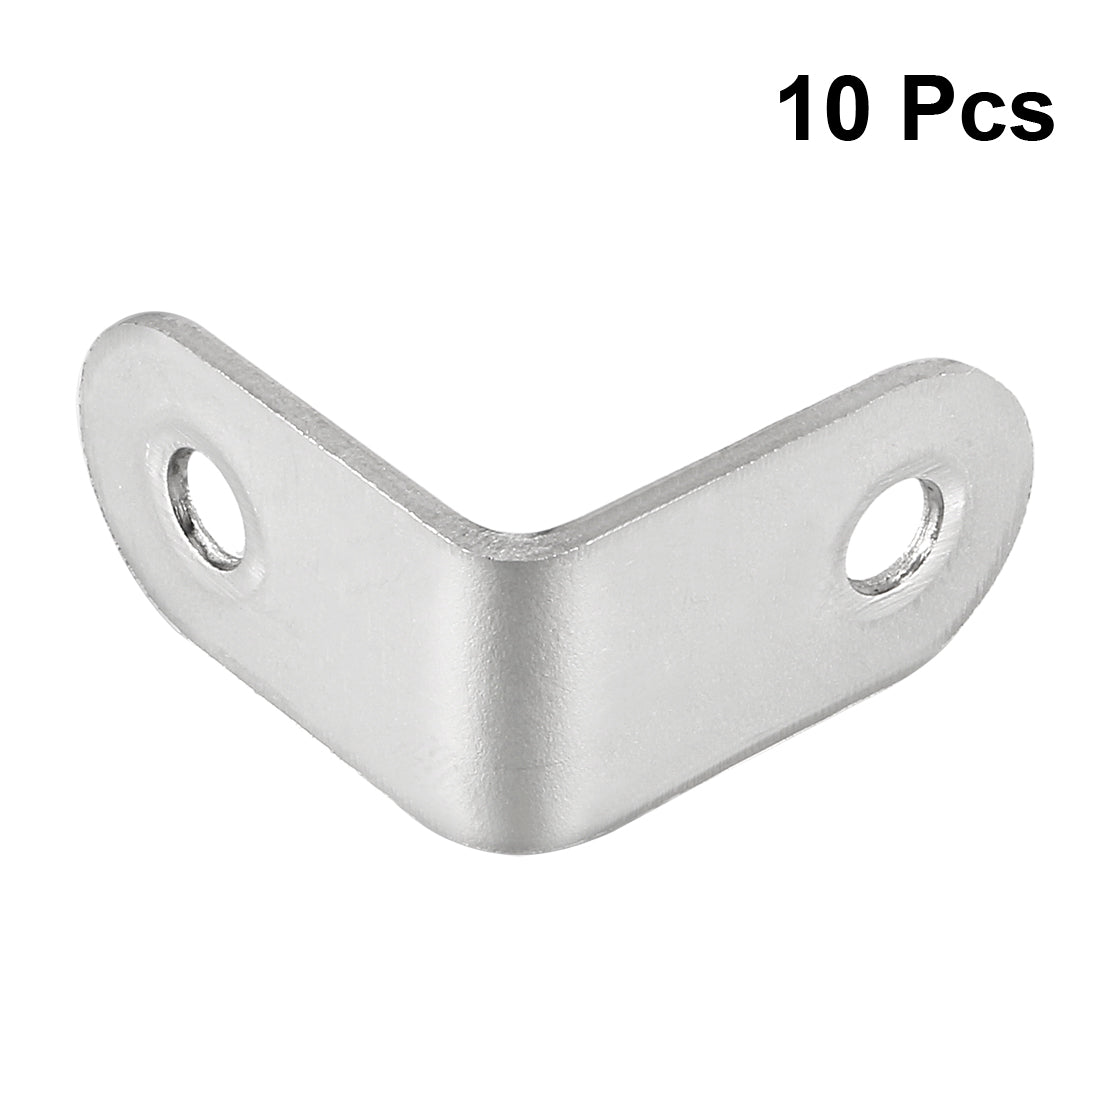 uxcell Uxcell 10pcs 25mmx25mmx16mm Stainless Steel Corner Brace Joint L Shape Right Angle Bracket Fastener